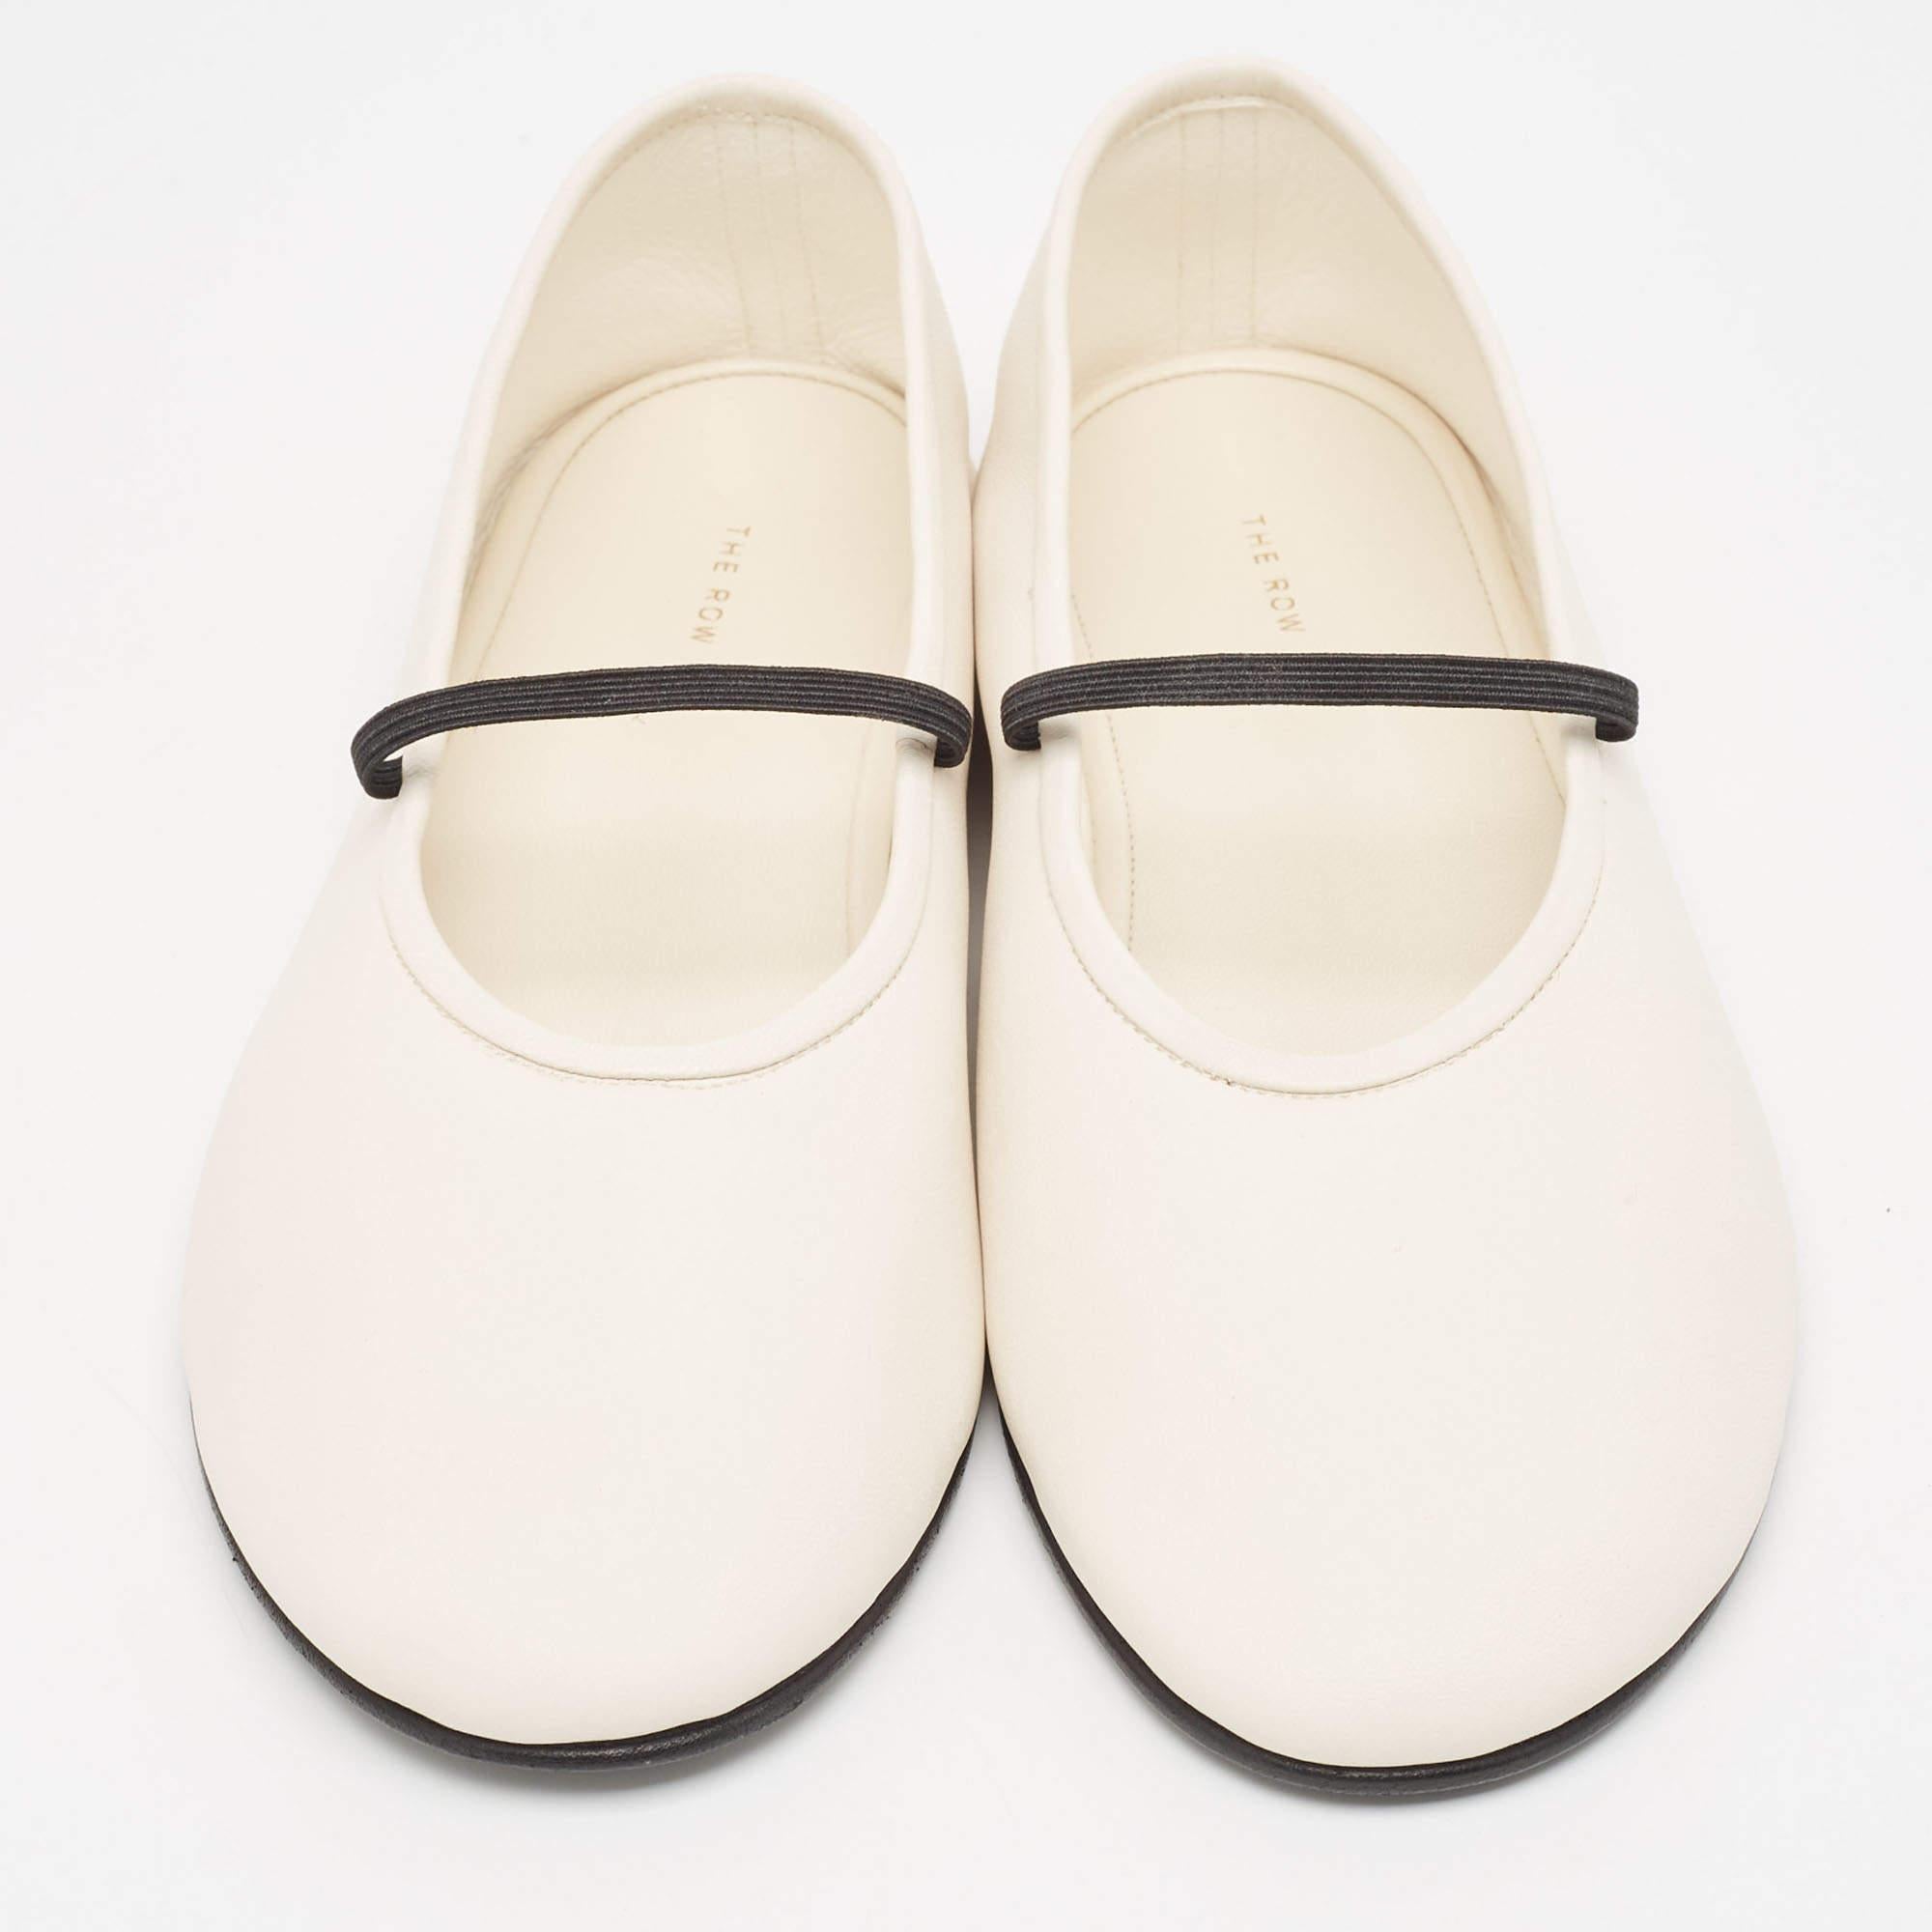 Complete your look by adding these designer ballet flats to your collection of everyday footwear. They are crafted skilfully to grant the perfect fit and style.

Includes: Original Dustbag, Original Box

